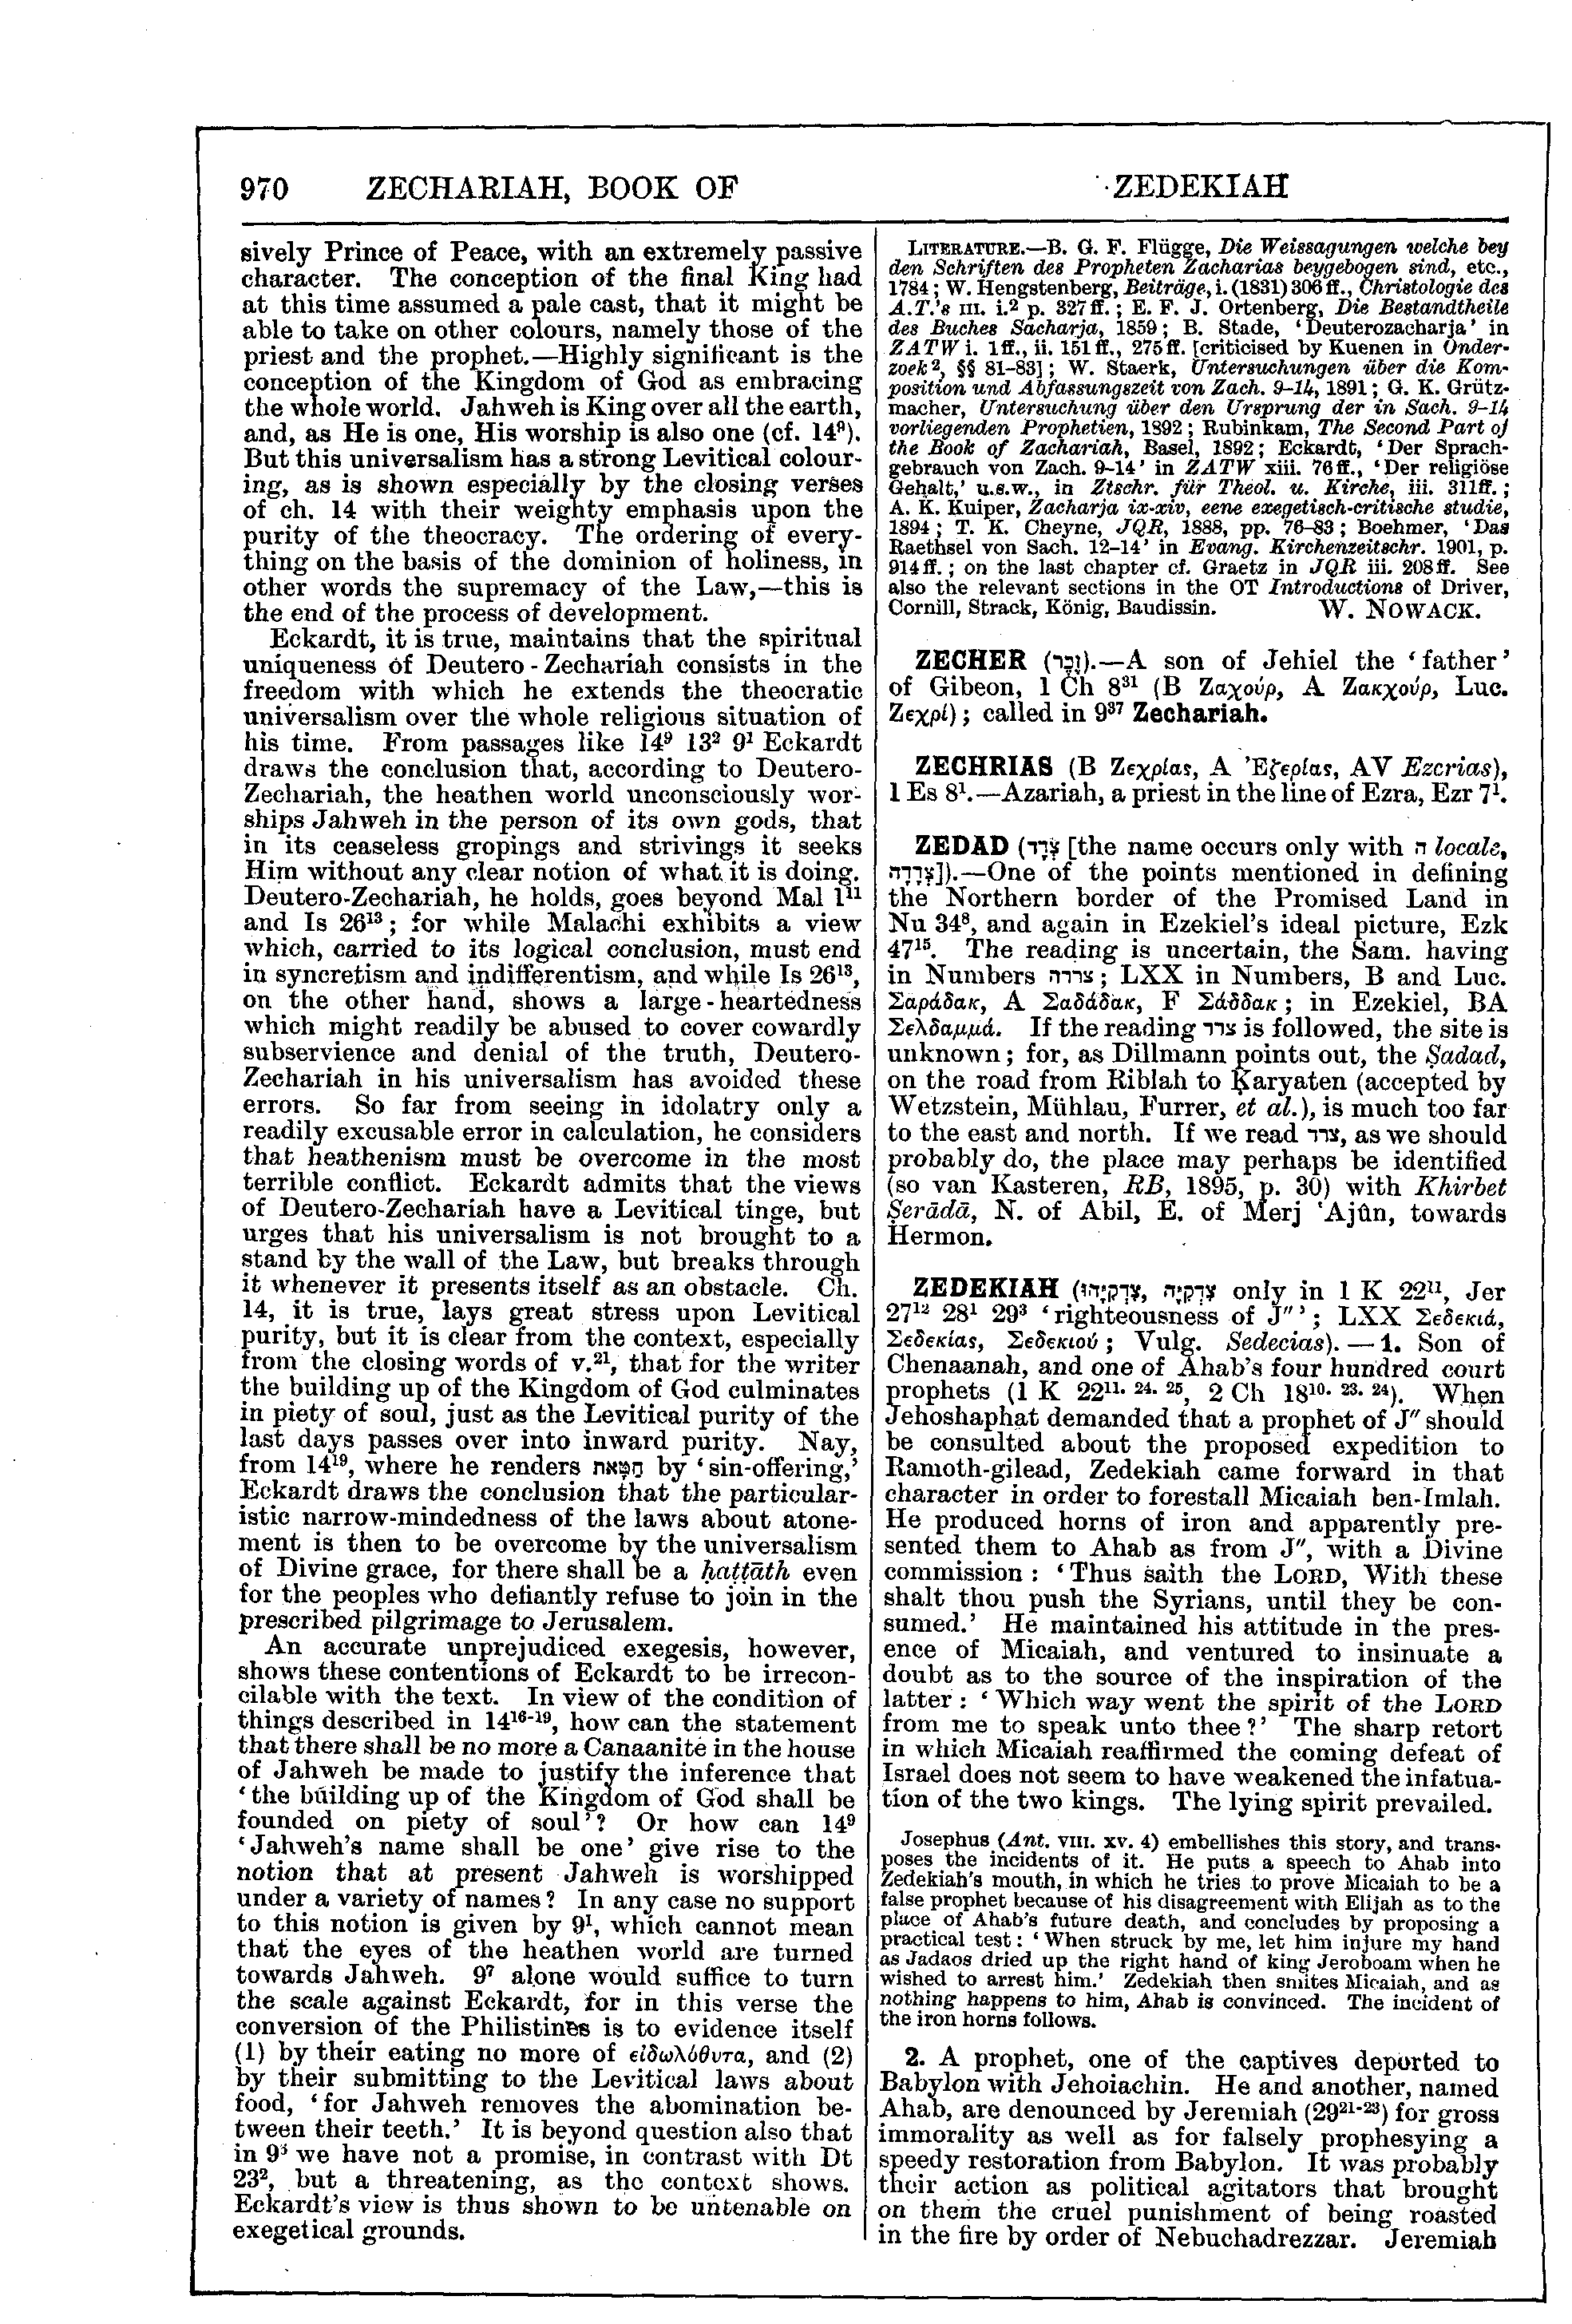 Image of page 970